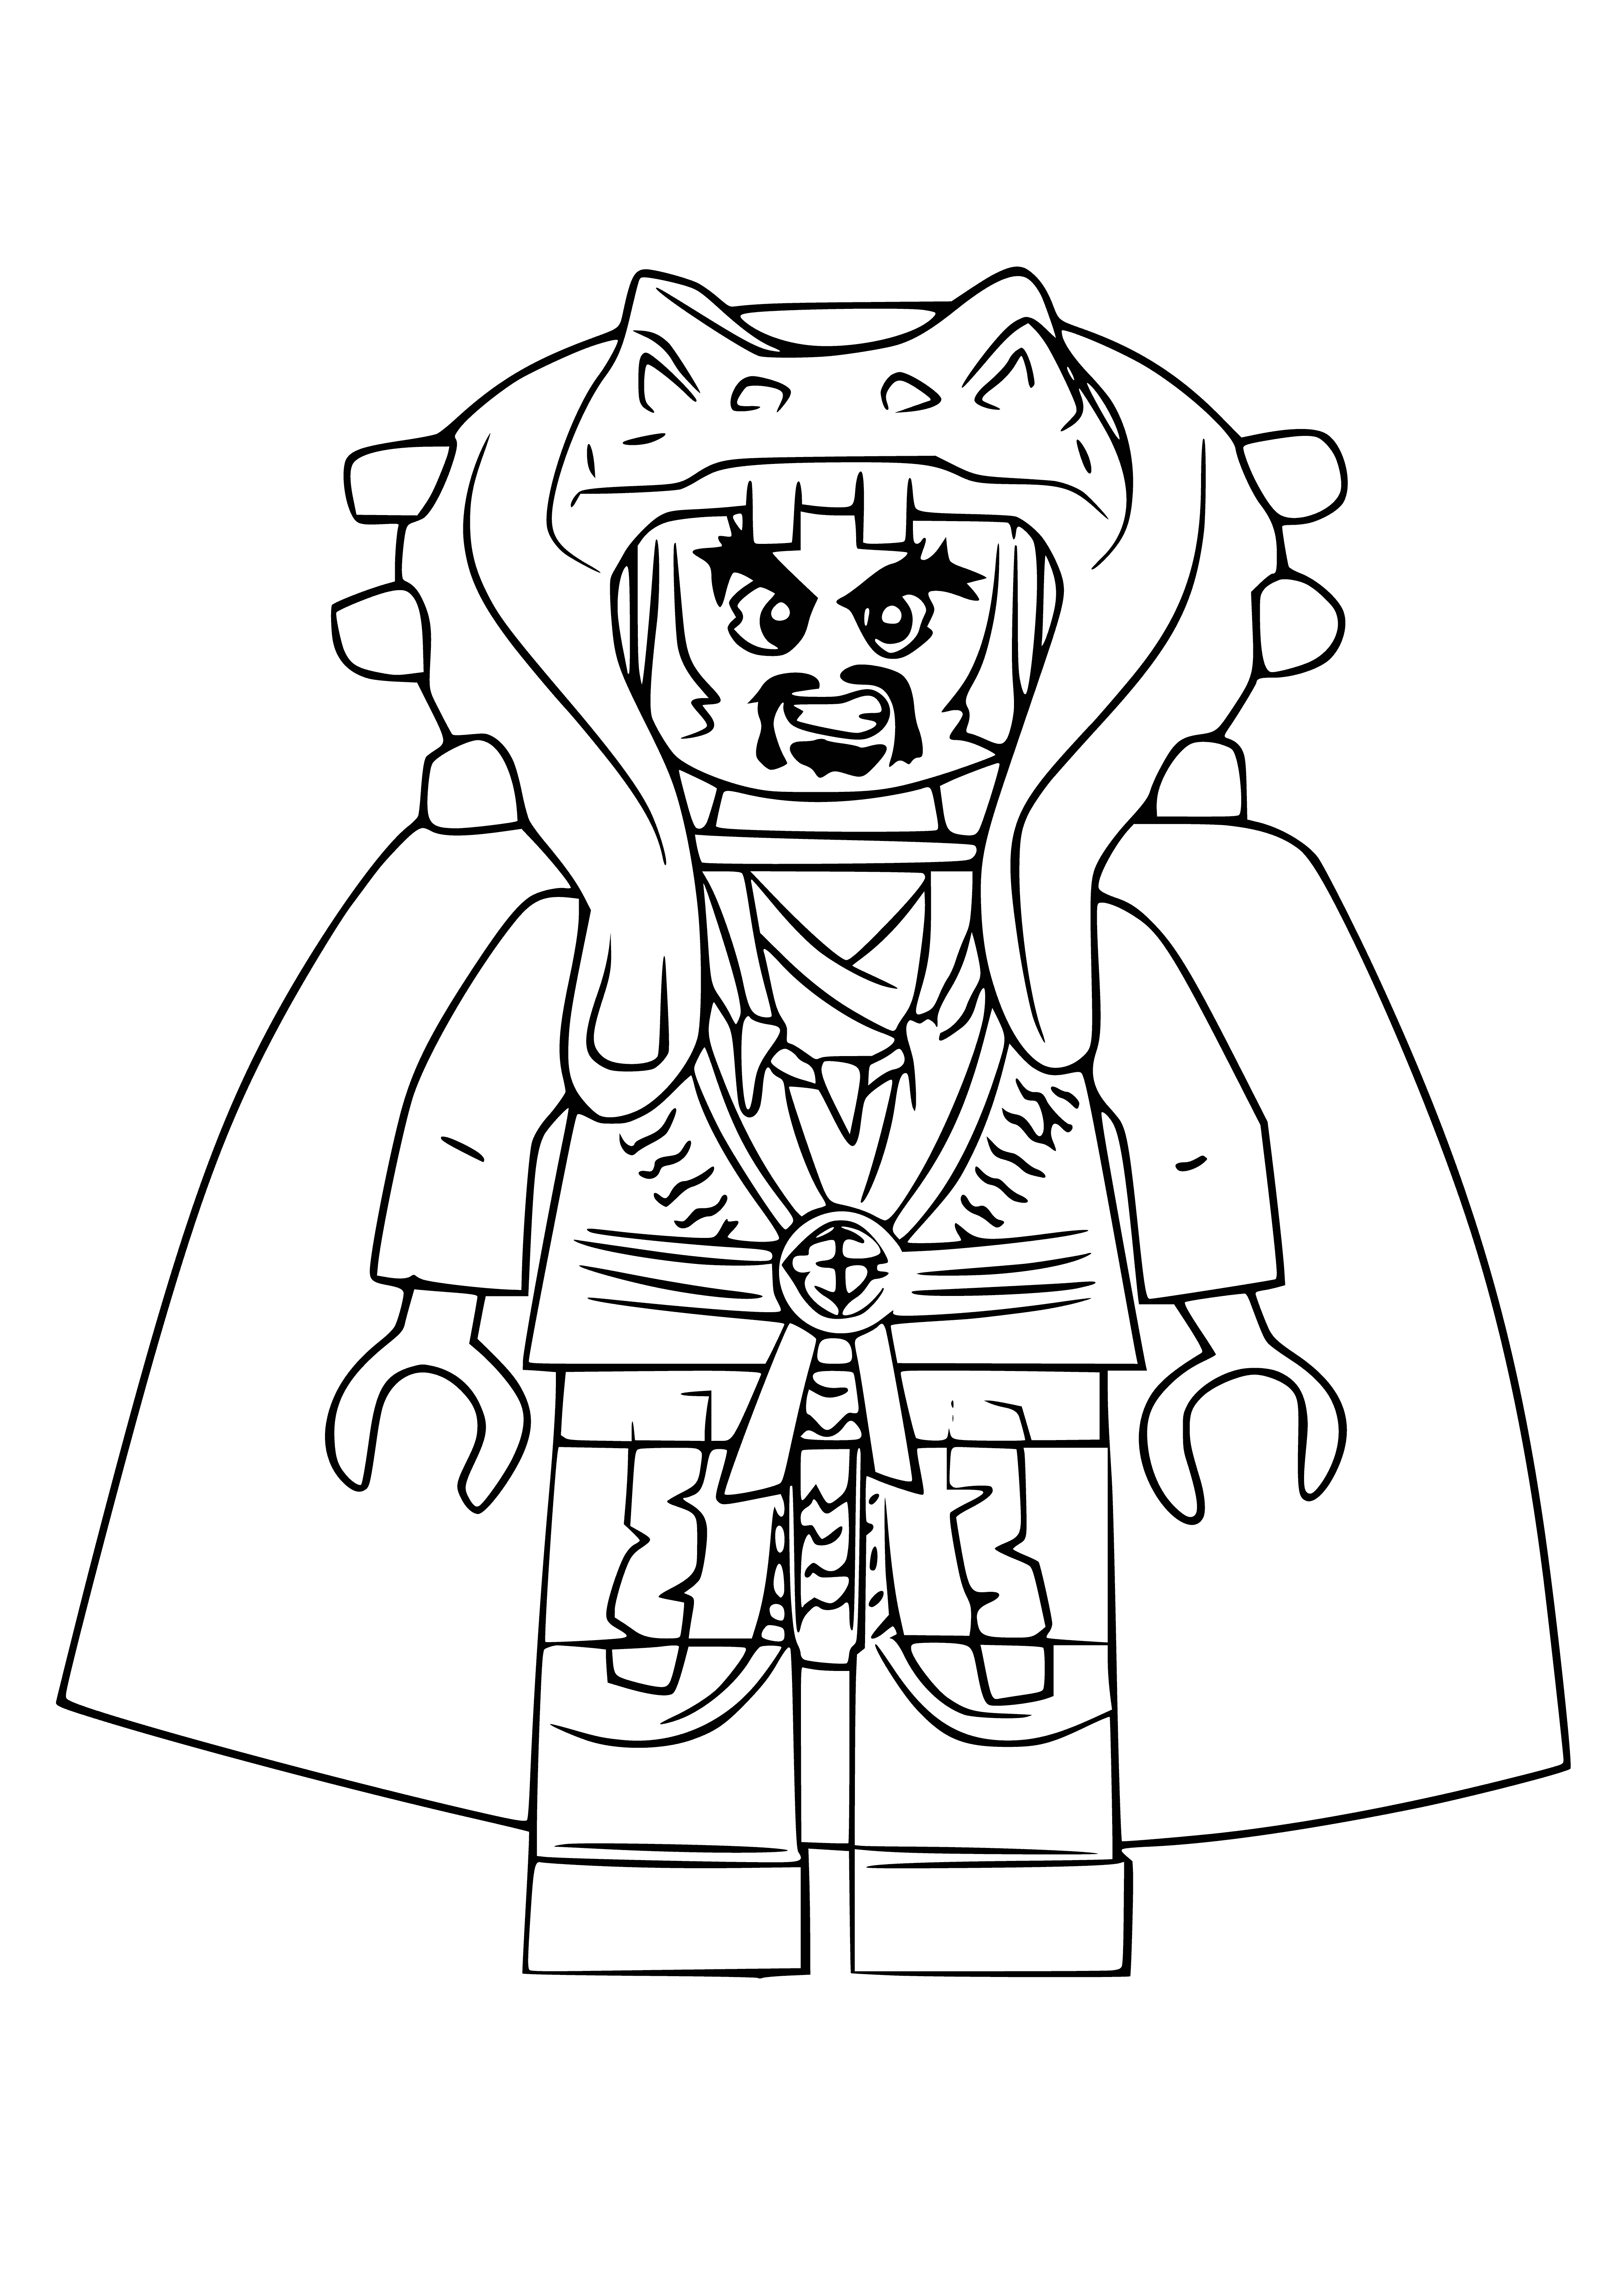 Master Chen coloring page